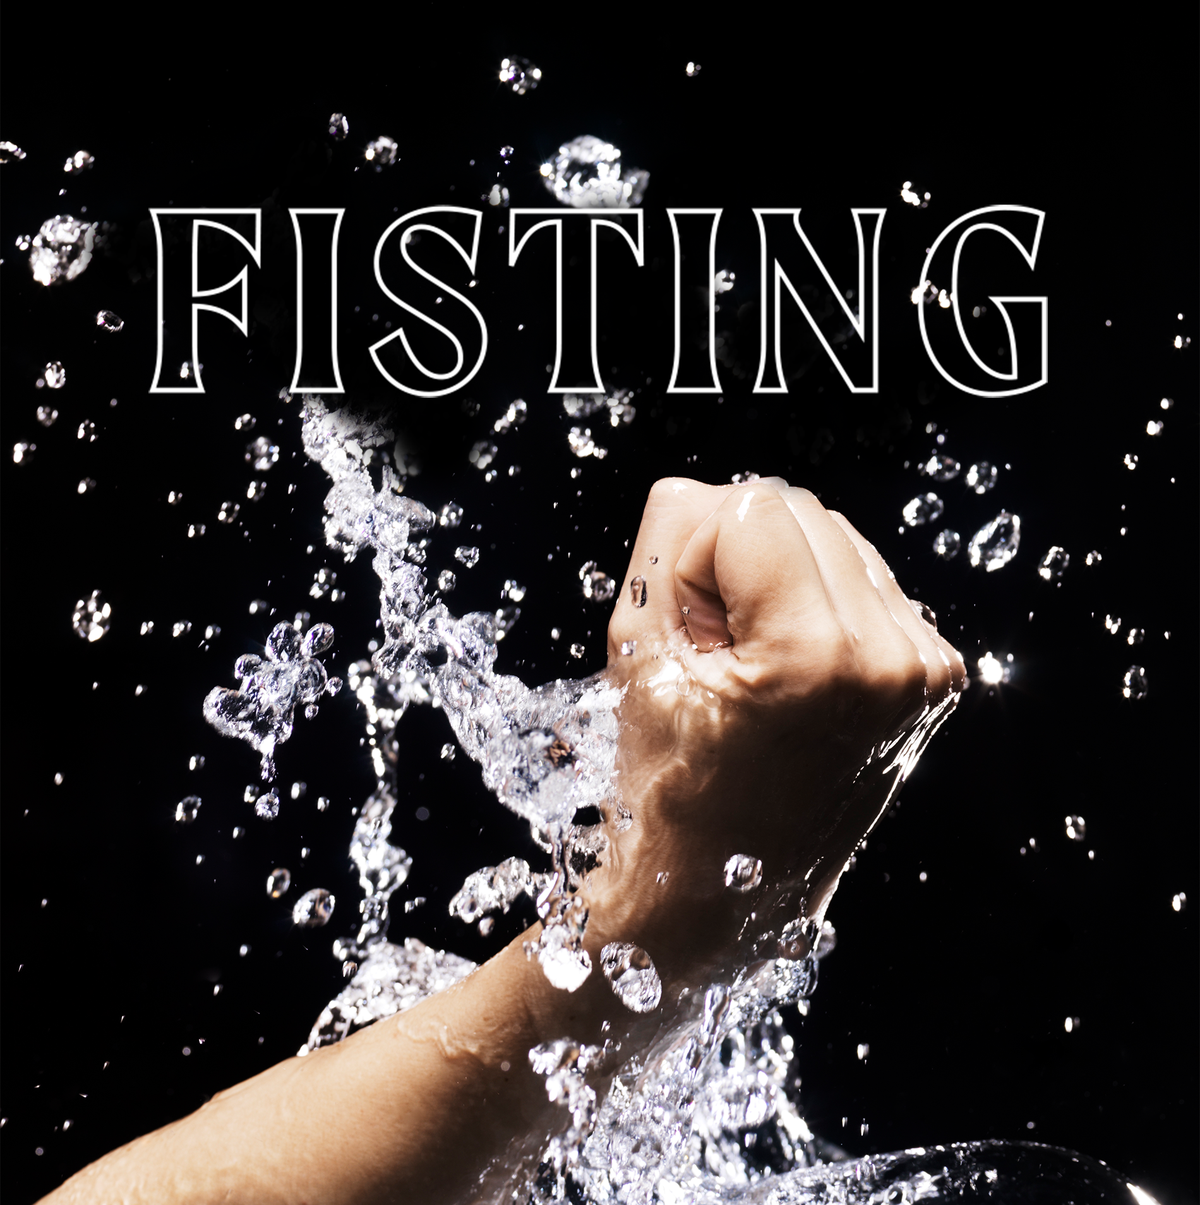 Pussy Fisting Art - 24 Fisting Tips for Beginners - How Do You Fist A Woman?